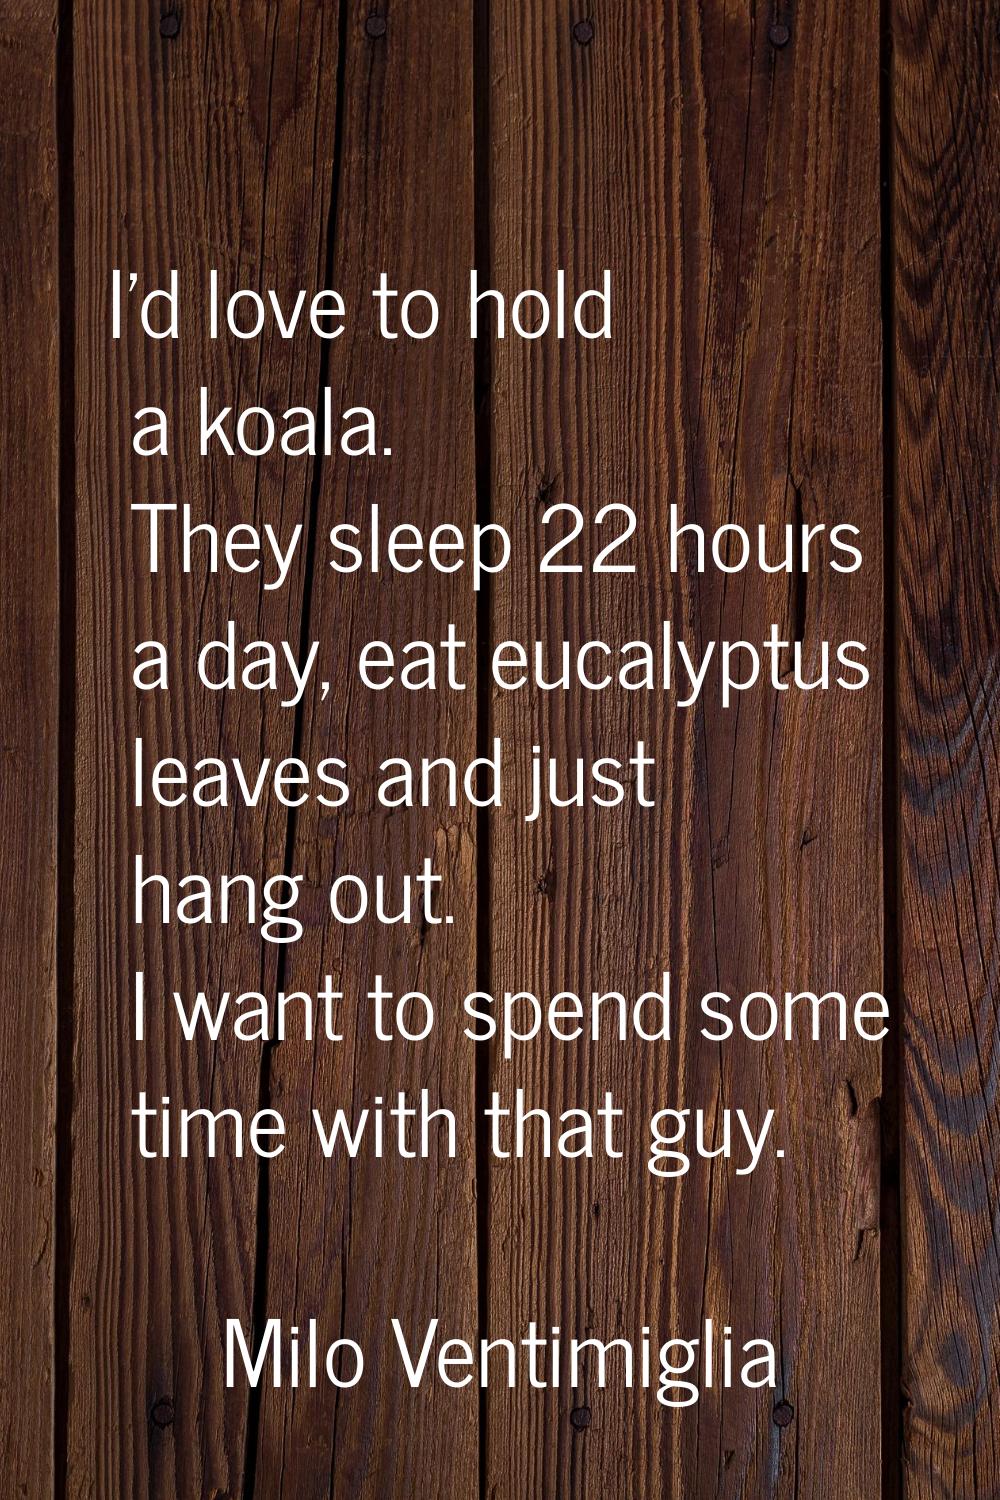 I'd love to hold a koala. They sleep 22 hours a day, eat eucalyptus leaves and just hang out. I wan